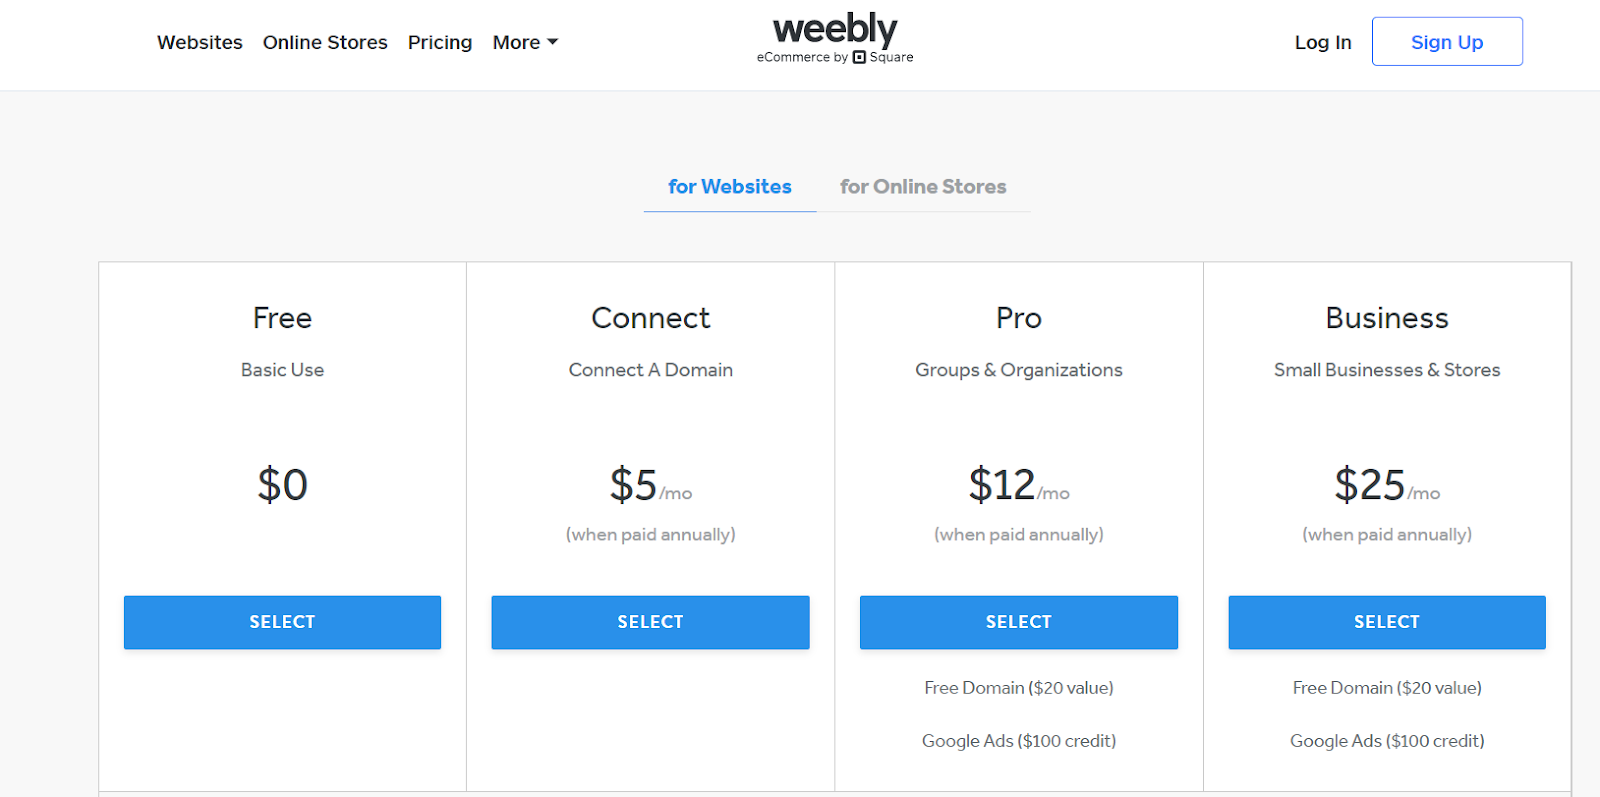 weebly pricing structure